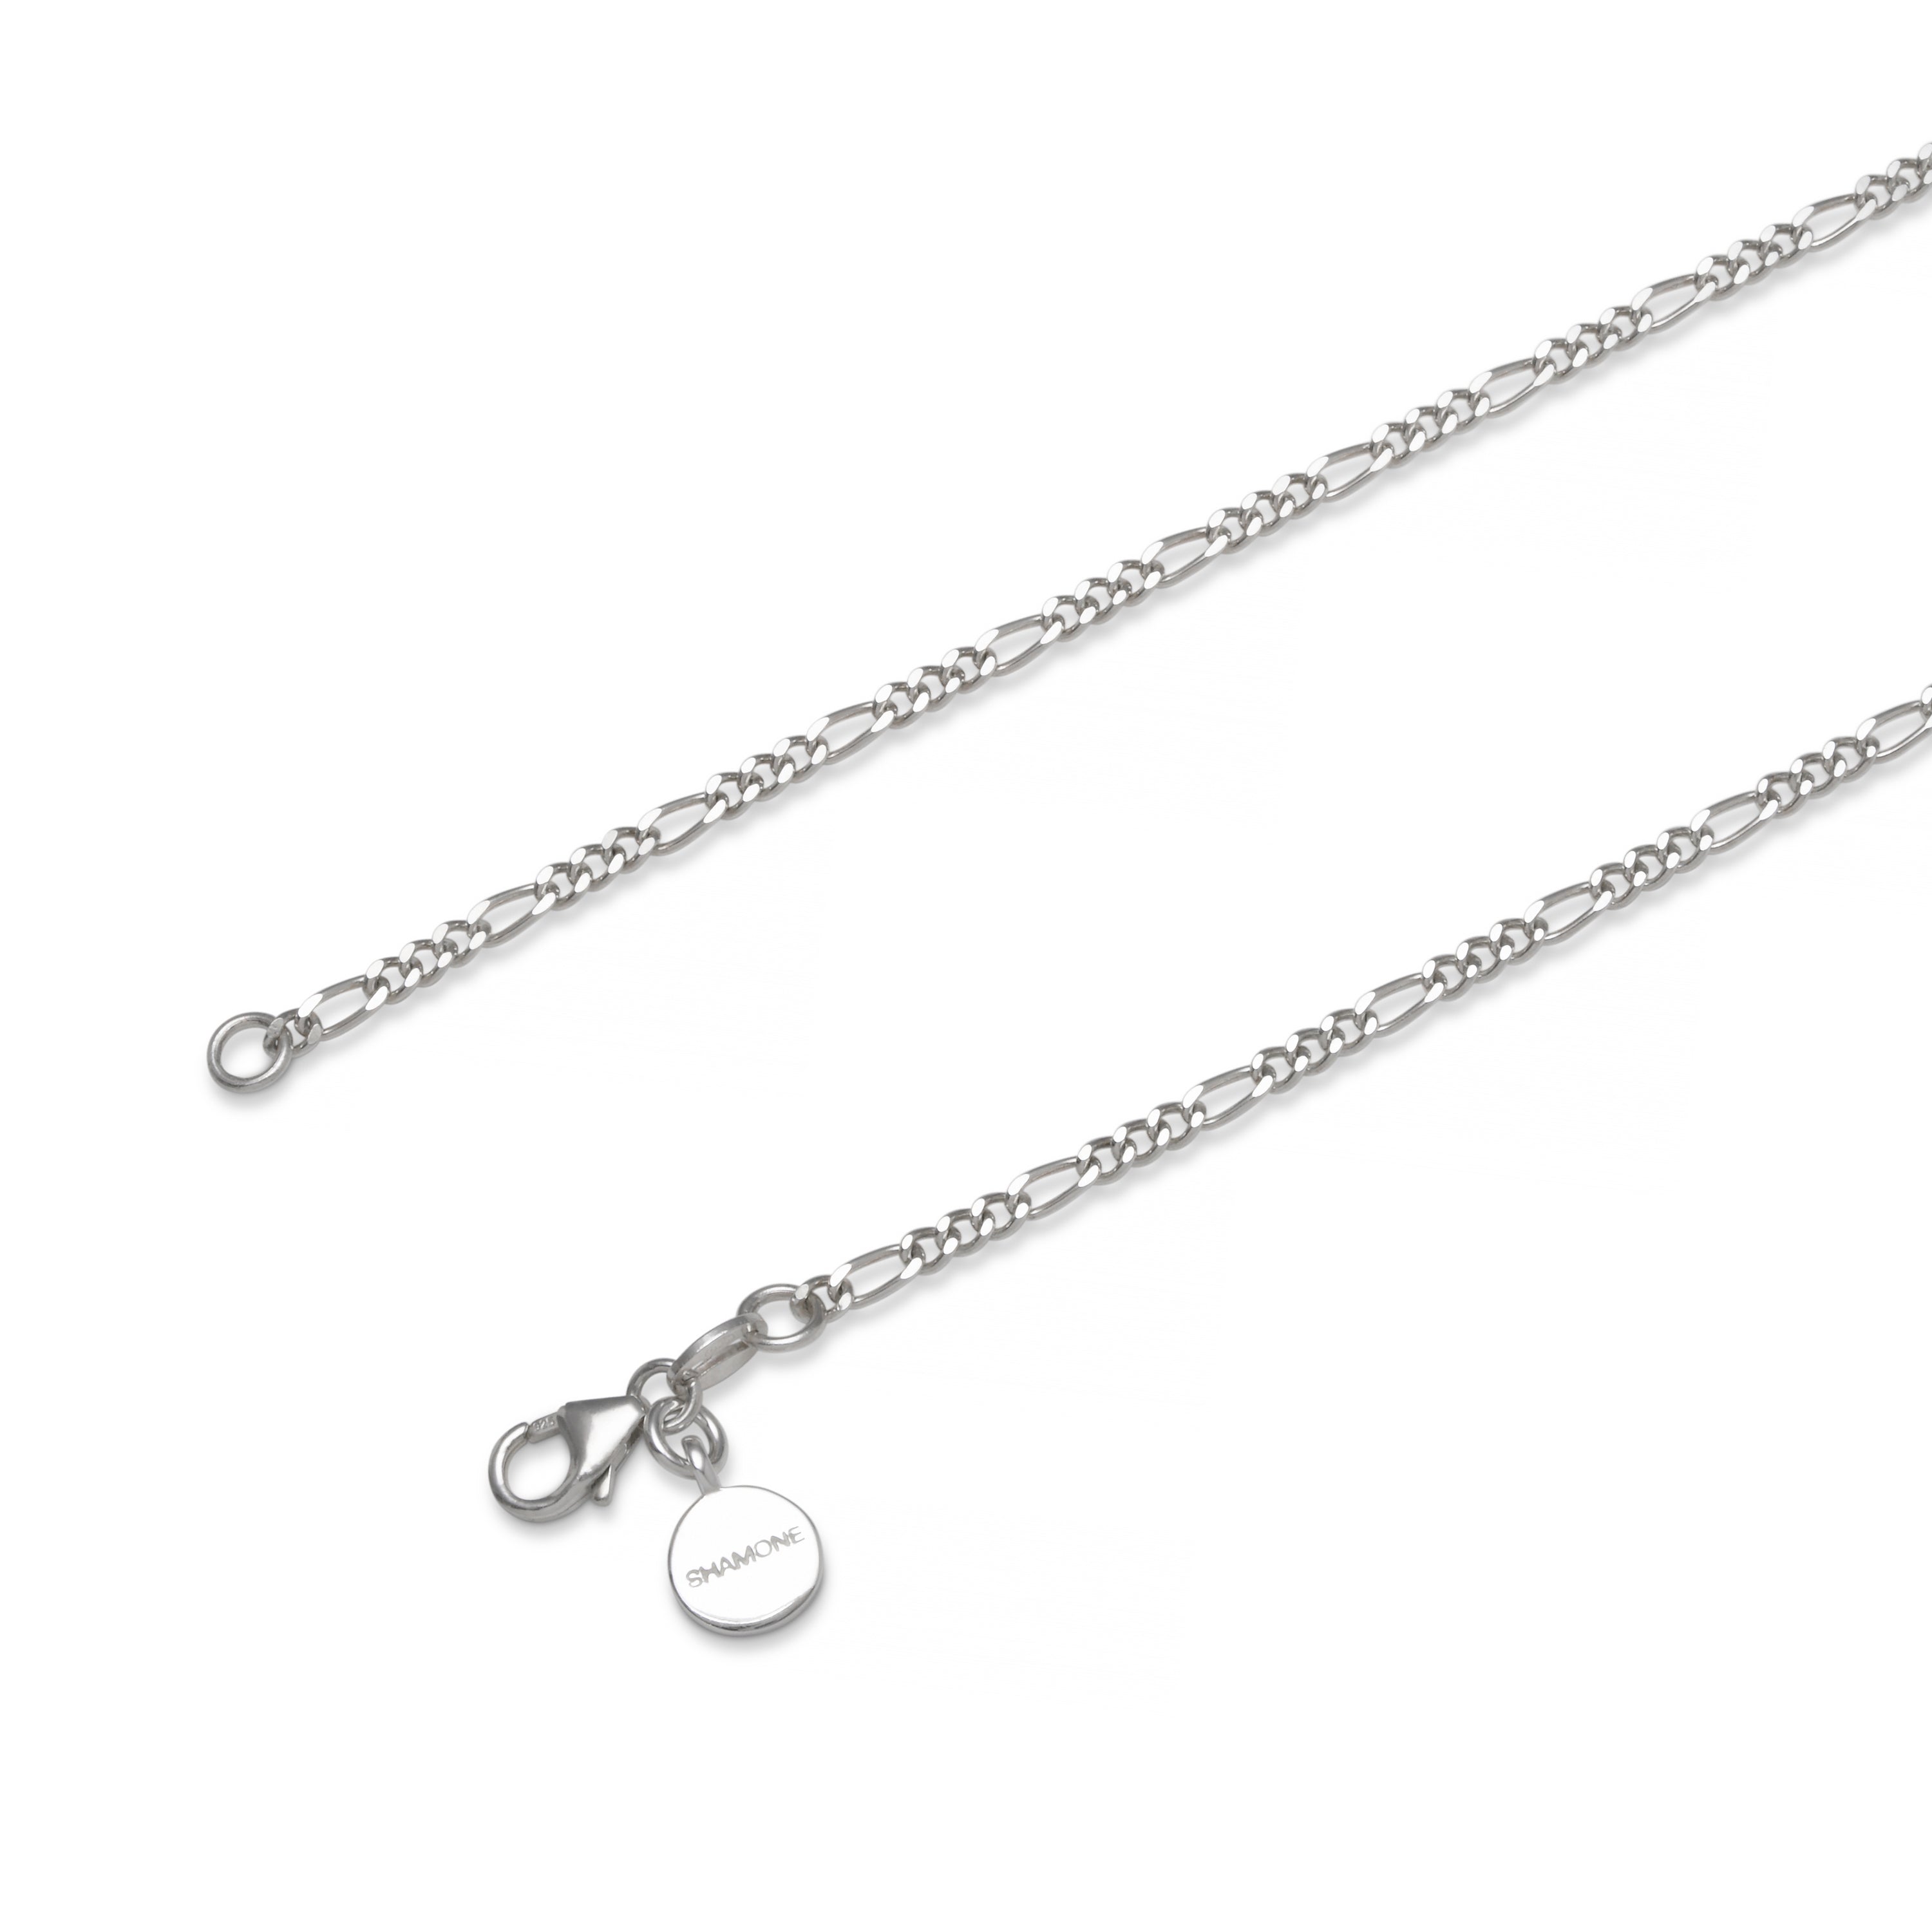 Good Luck Knife - Silver Figaro Chain with Knife Pendant - 55cm